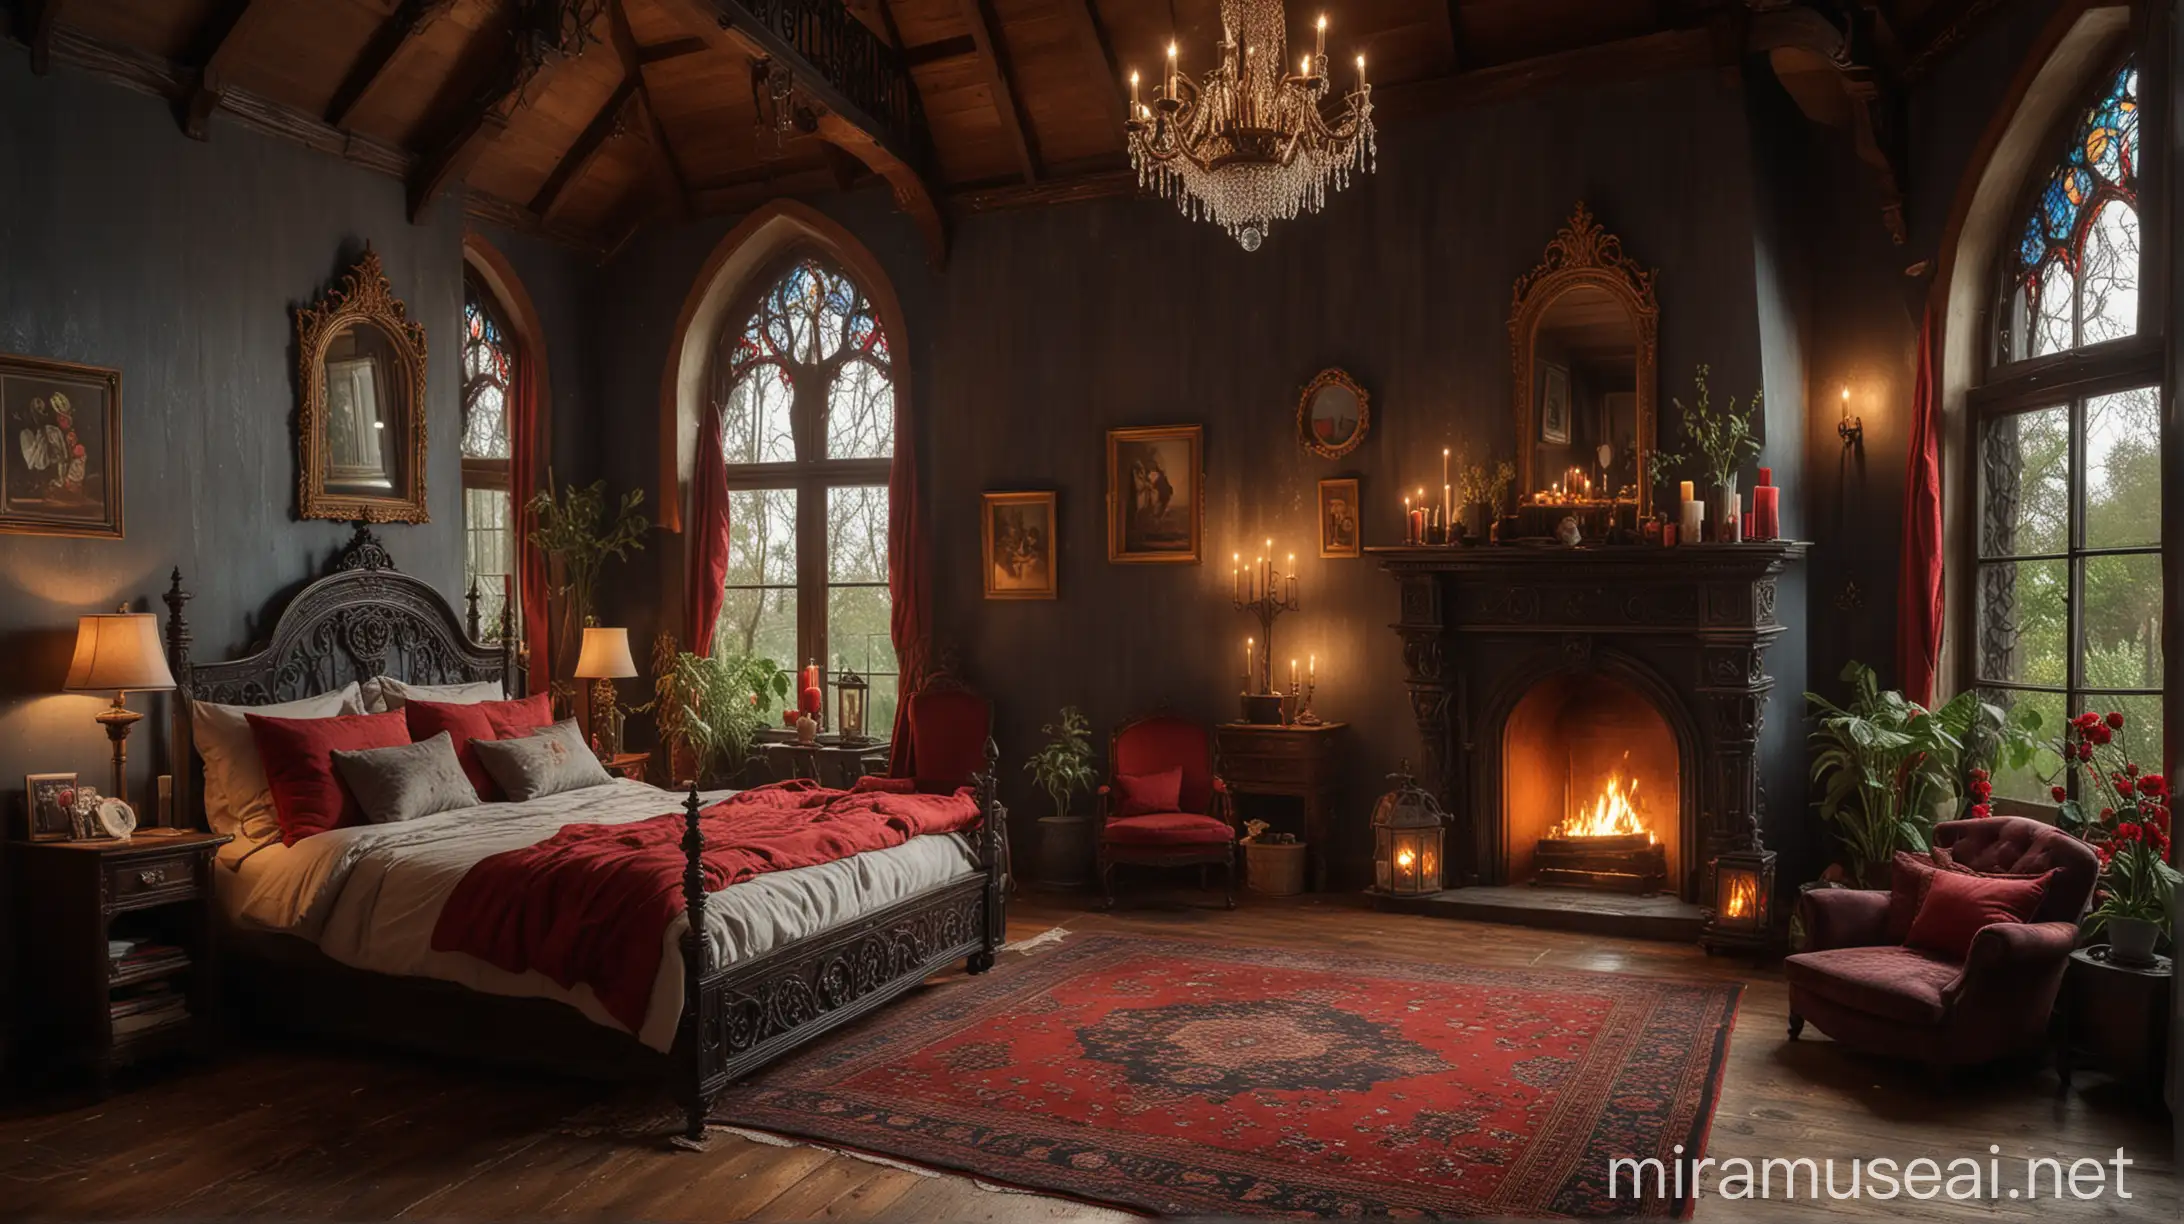 Luxurious Gothic Bedroom with FourPoster Bed and Stained Glass Windows